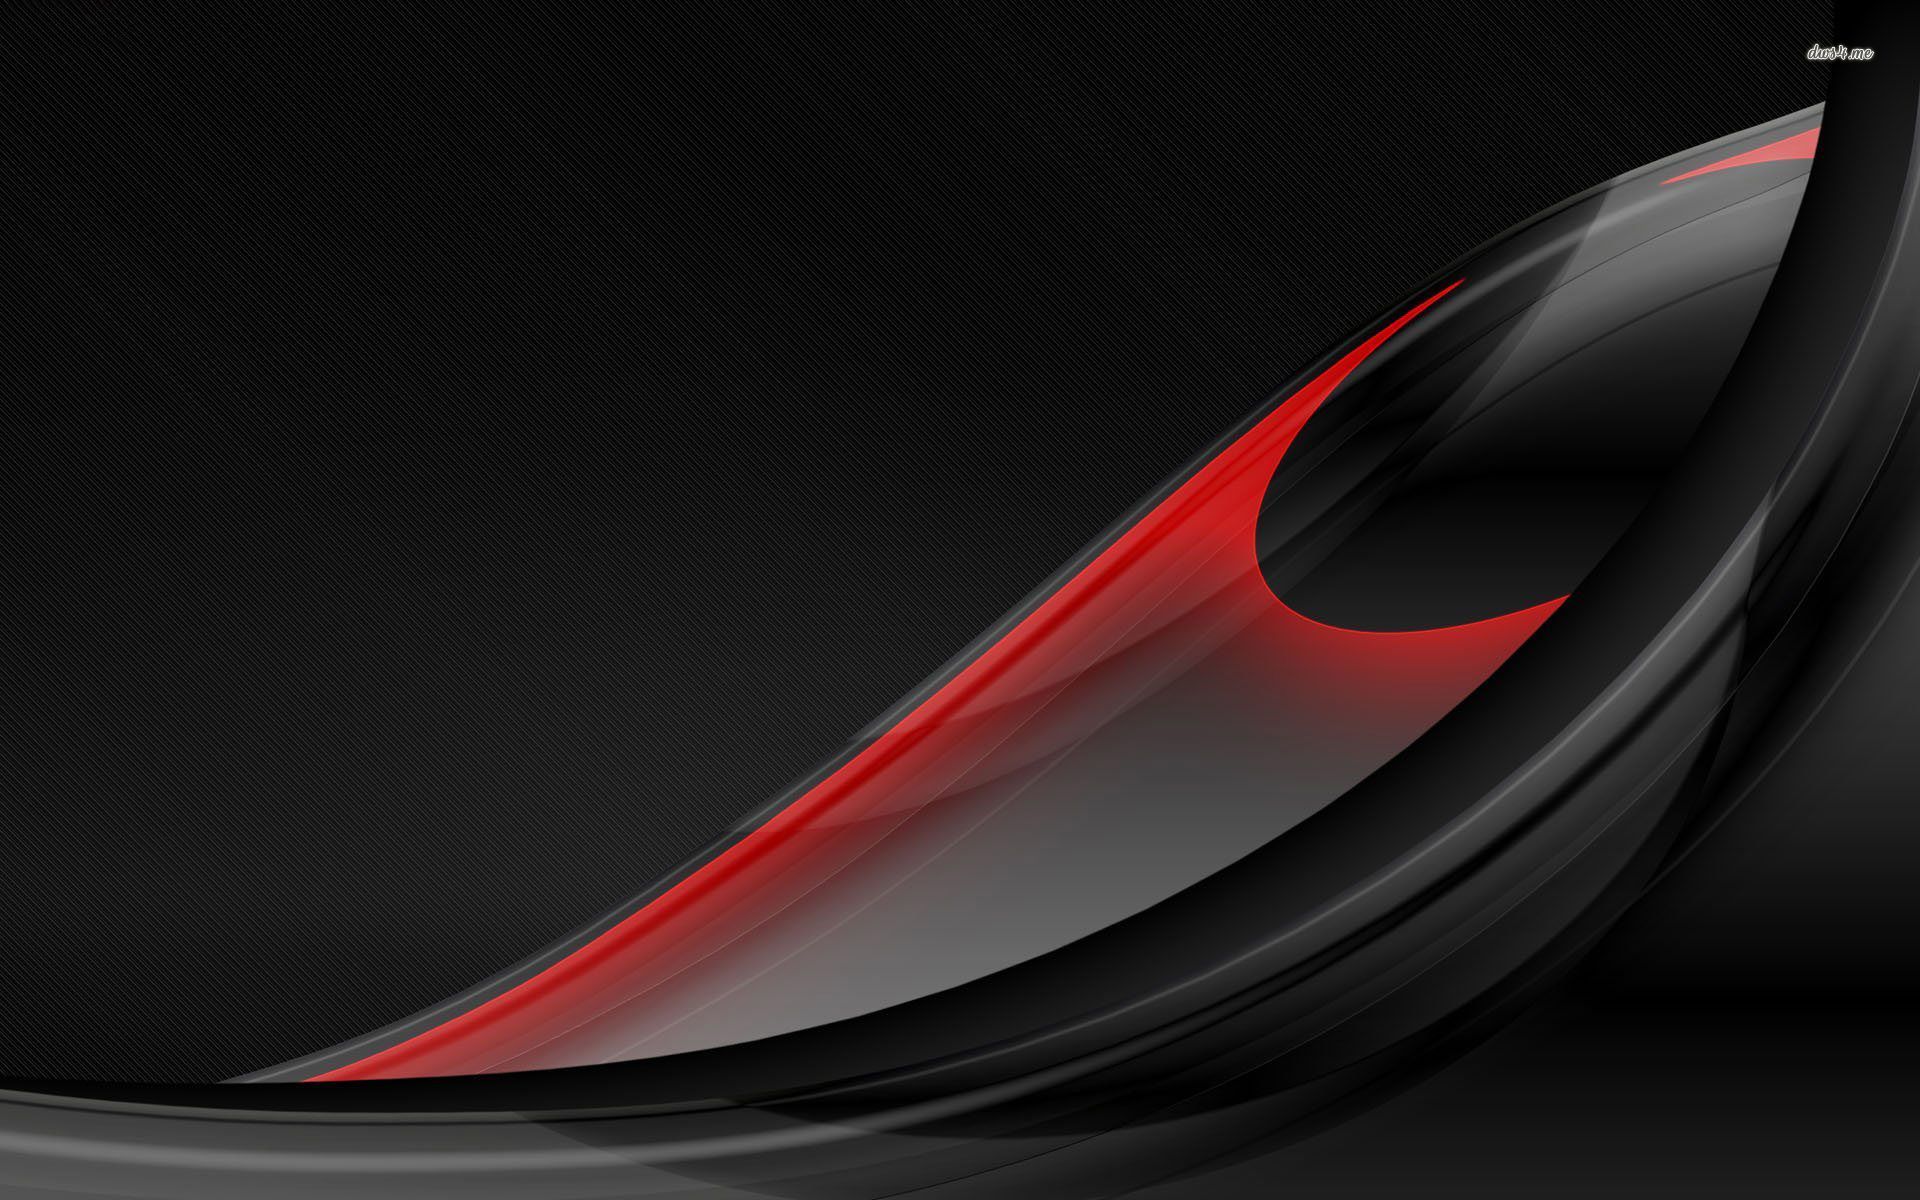 Image And Red Abstract Desktop Wallpaper Black Pc